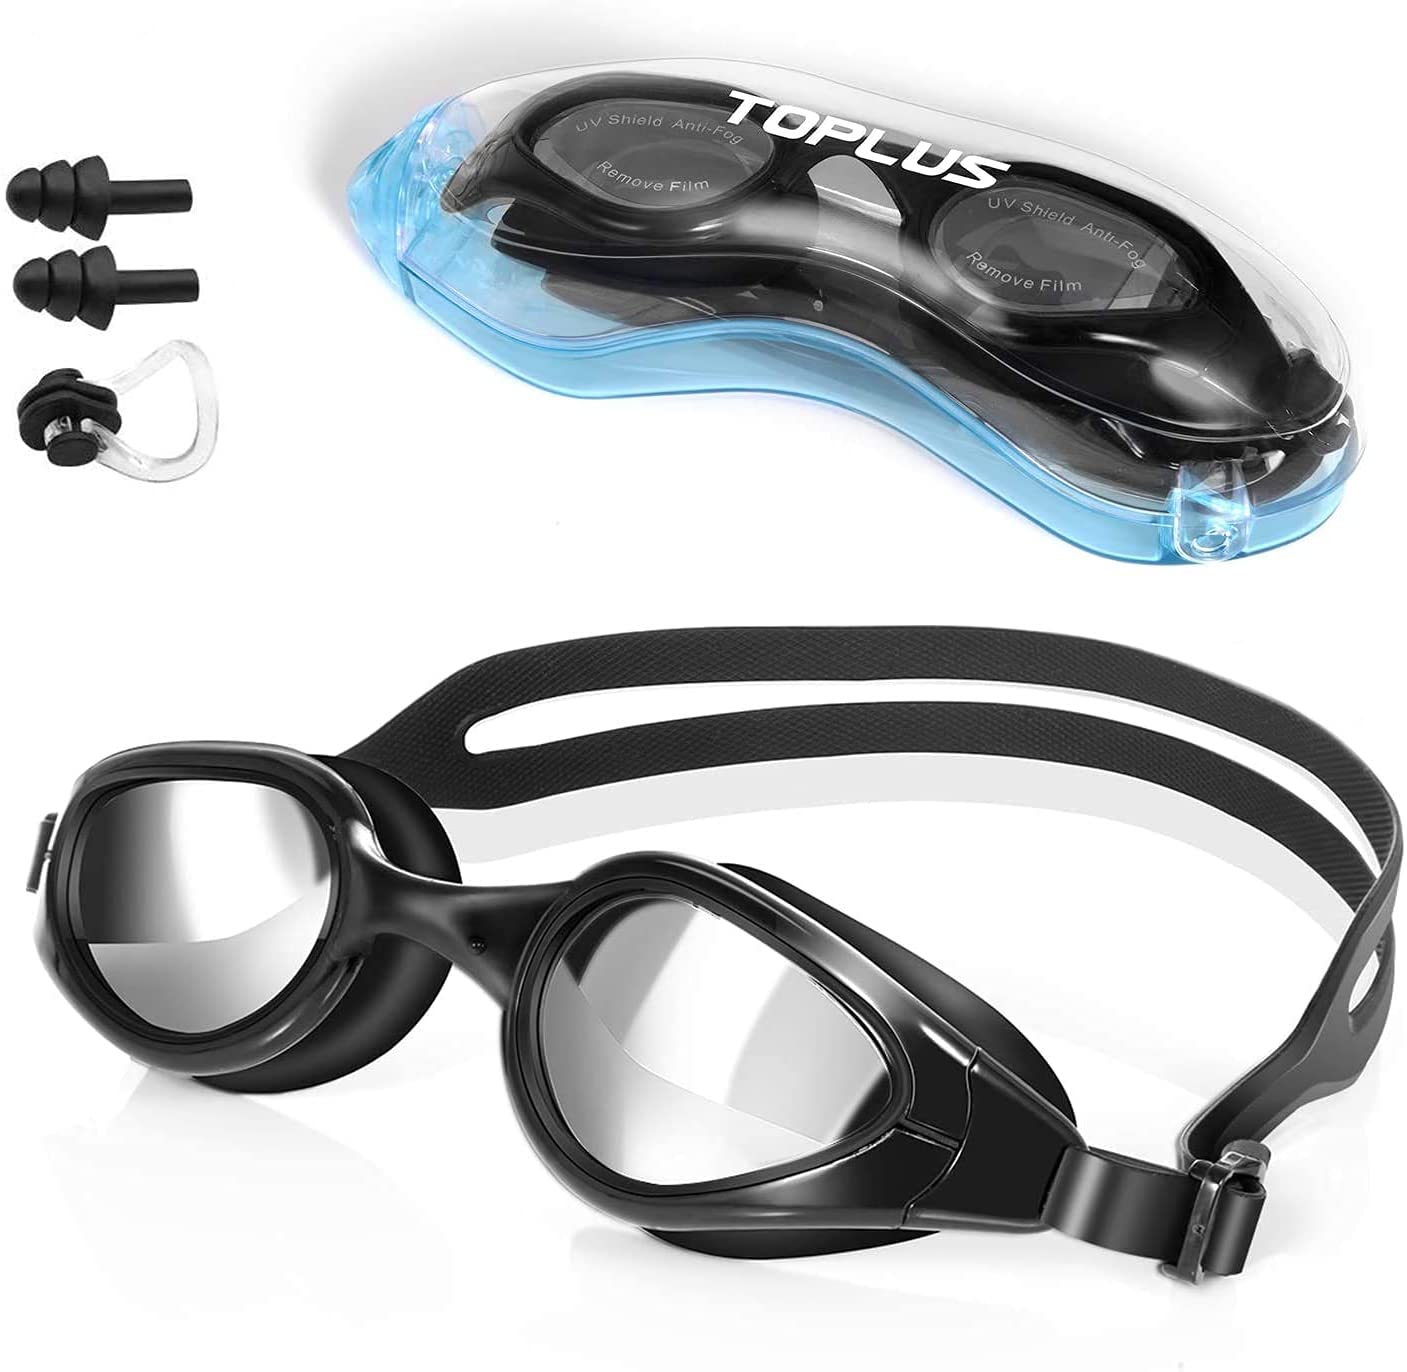 No Leaking for Man & Women UV Protection,180 Degree Vision Anti-Fog Swim Goggles for Competition Black/White/Blue with Free Storage Case Earplugs and Nose Clip CybGene Swimming Goggles Adult 